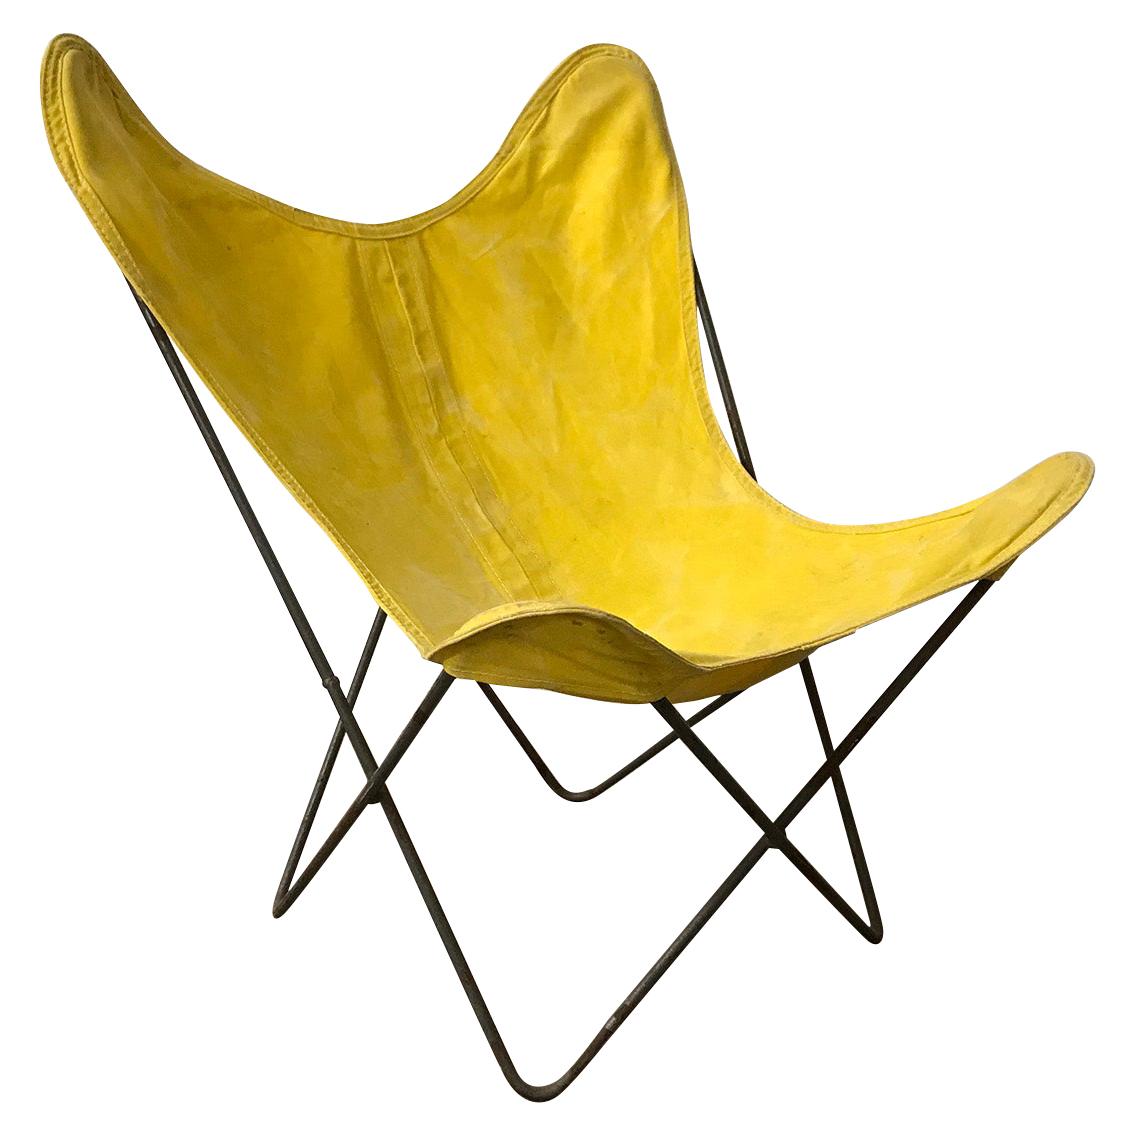 1947, Hardoy, Ferrari, Yellow Cover with Black Base Butterfly Chair